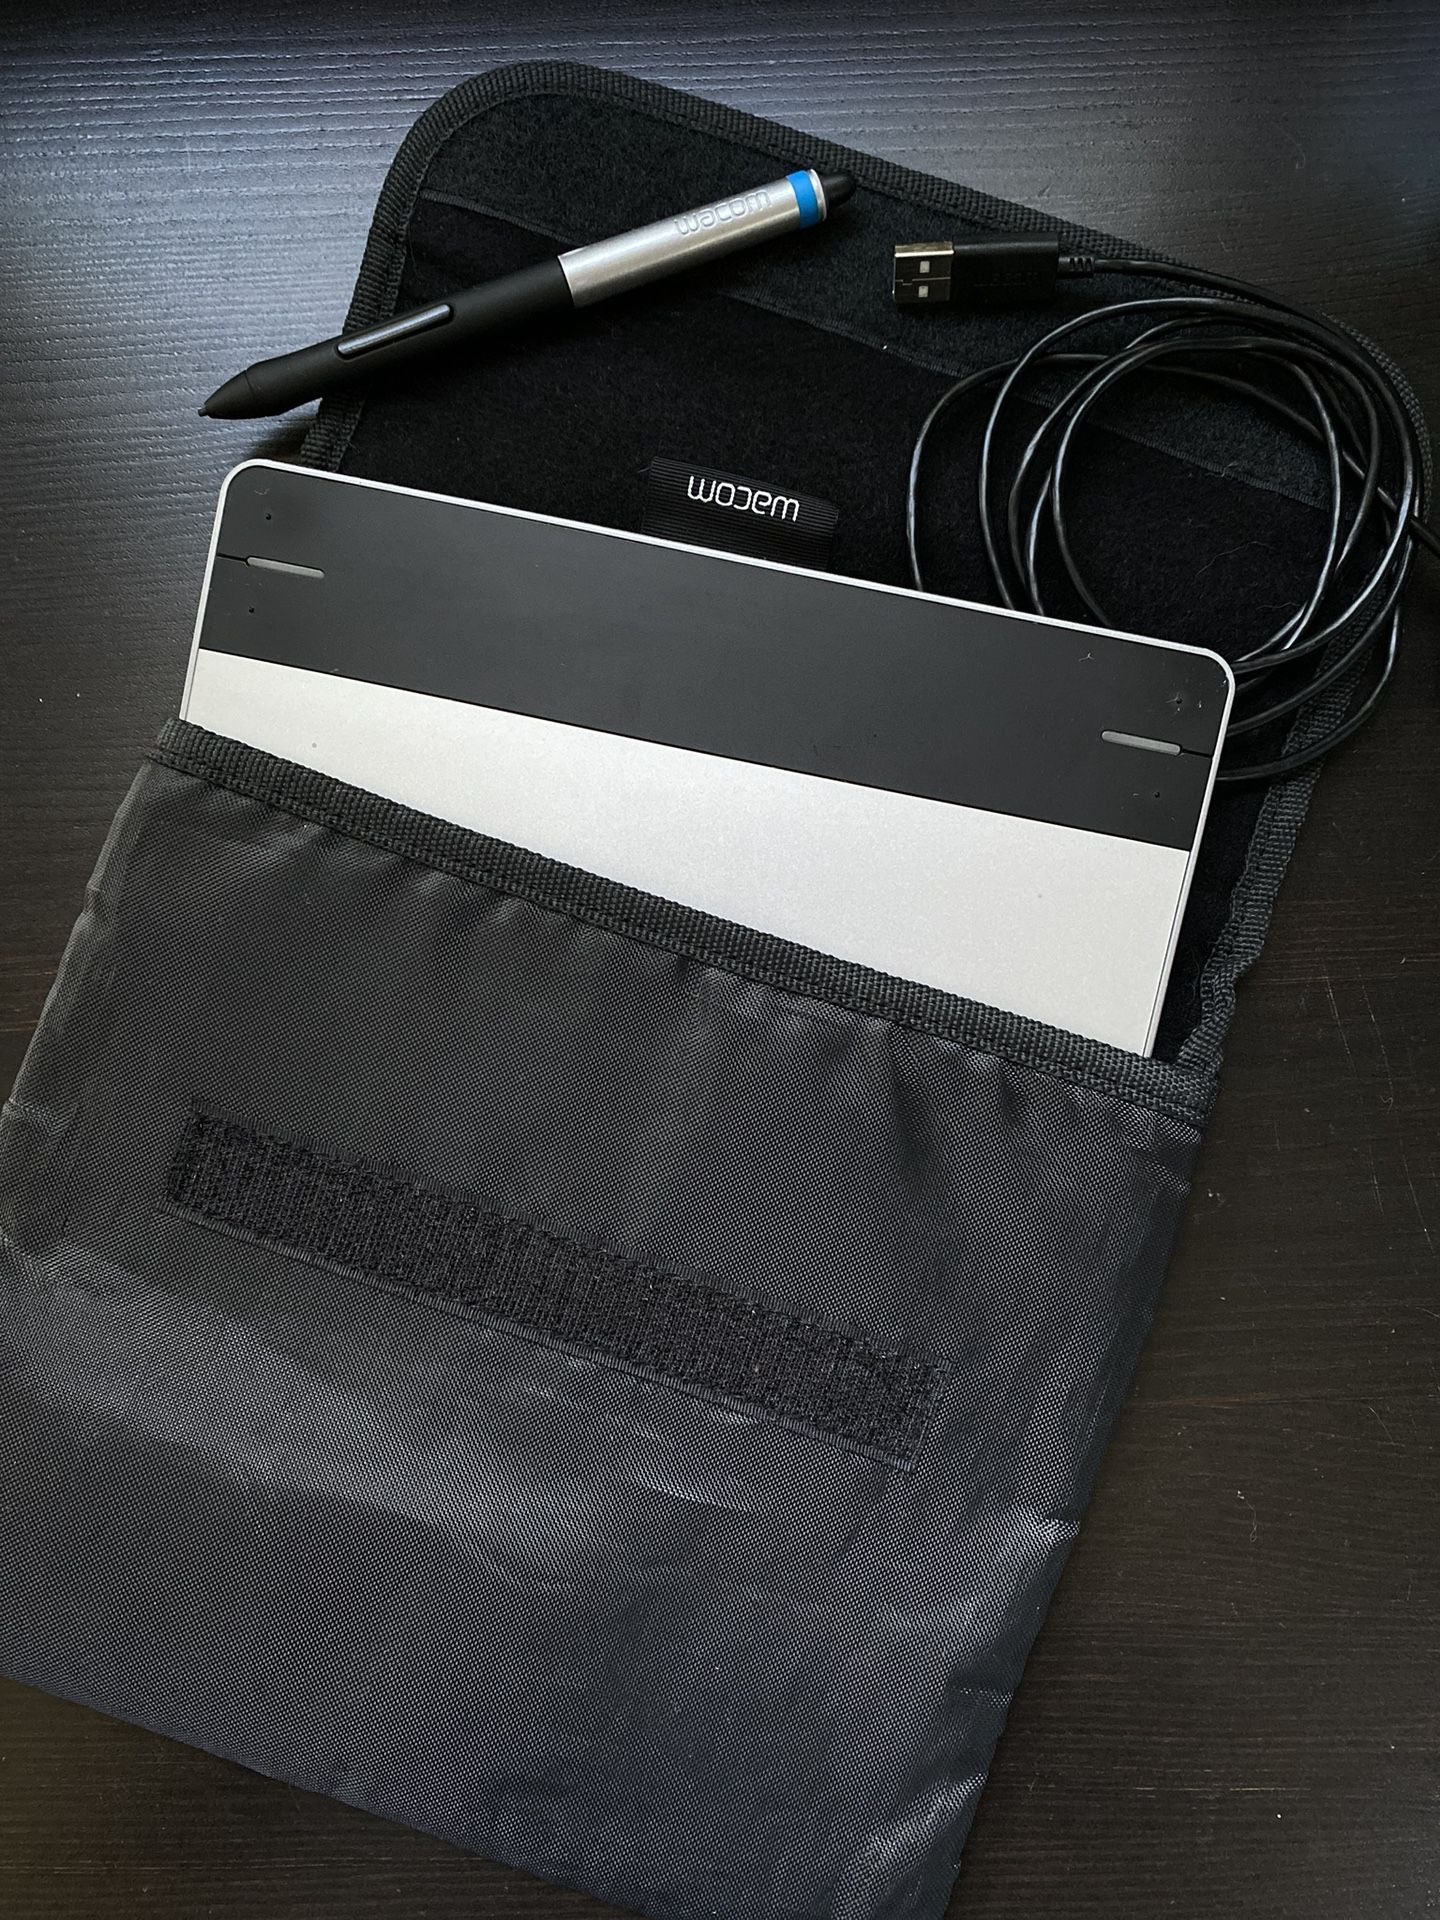 Two Wacom tablets: Bamboo CTH-460 & Intuos pen and touch small CTH-480